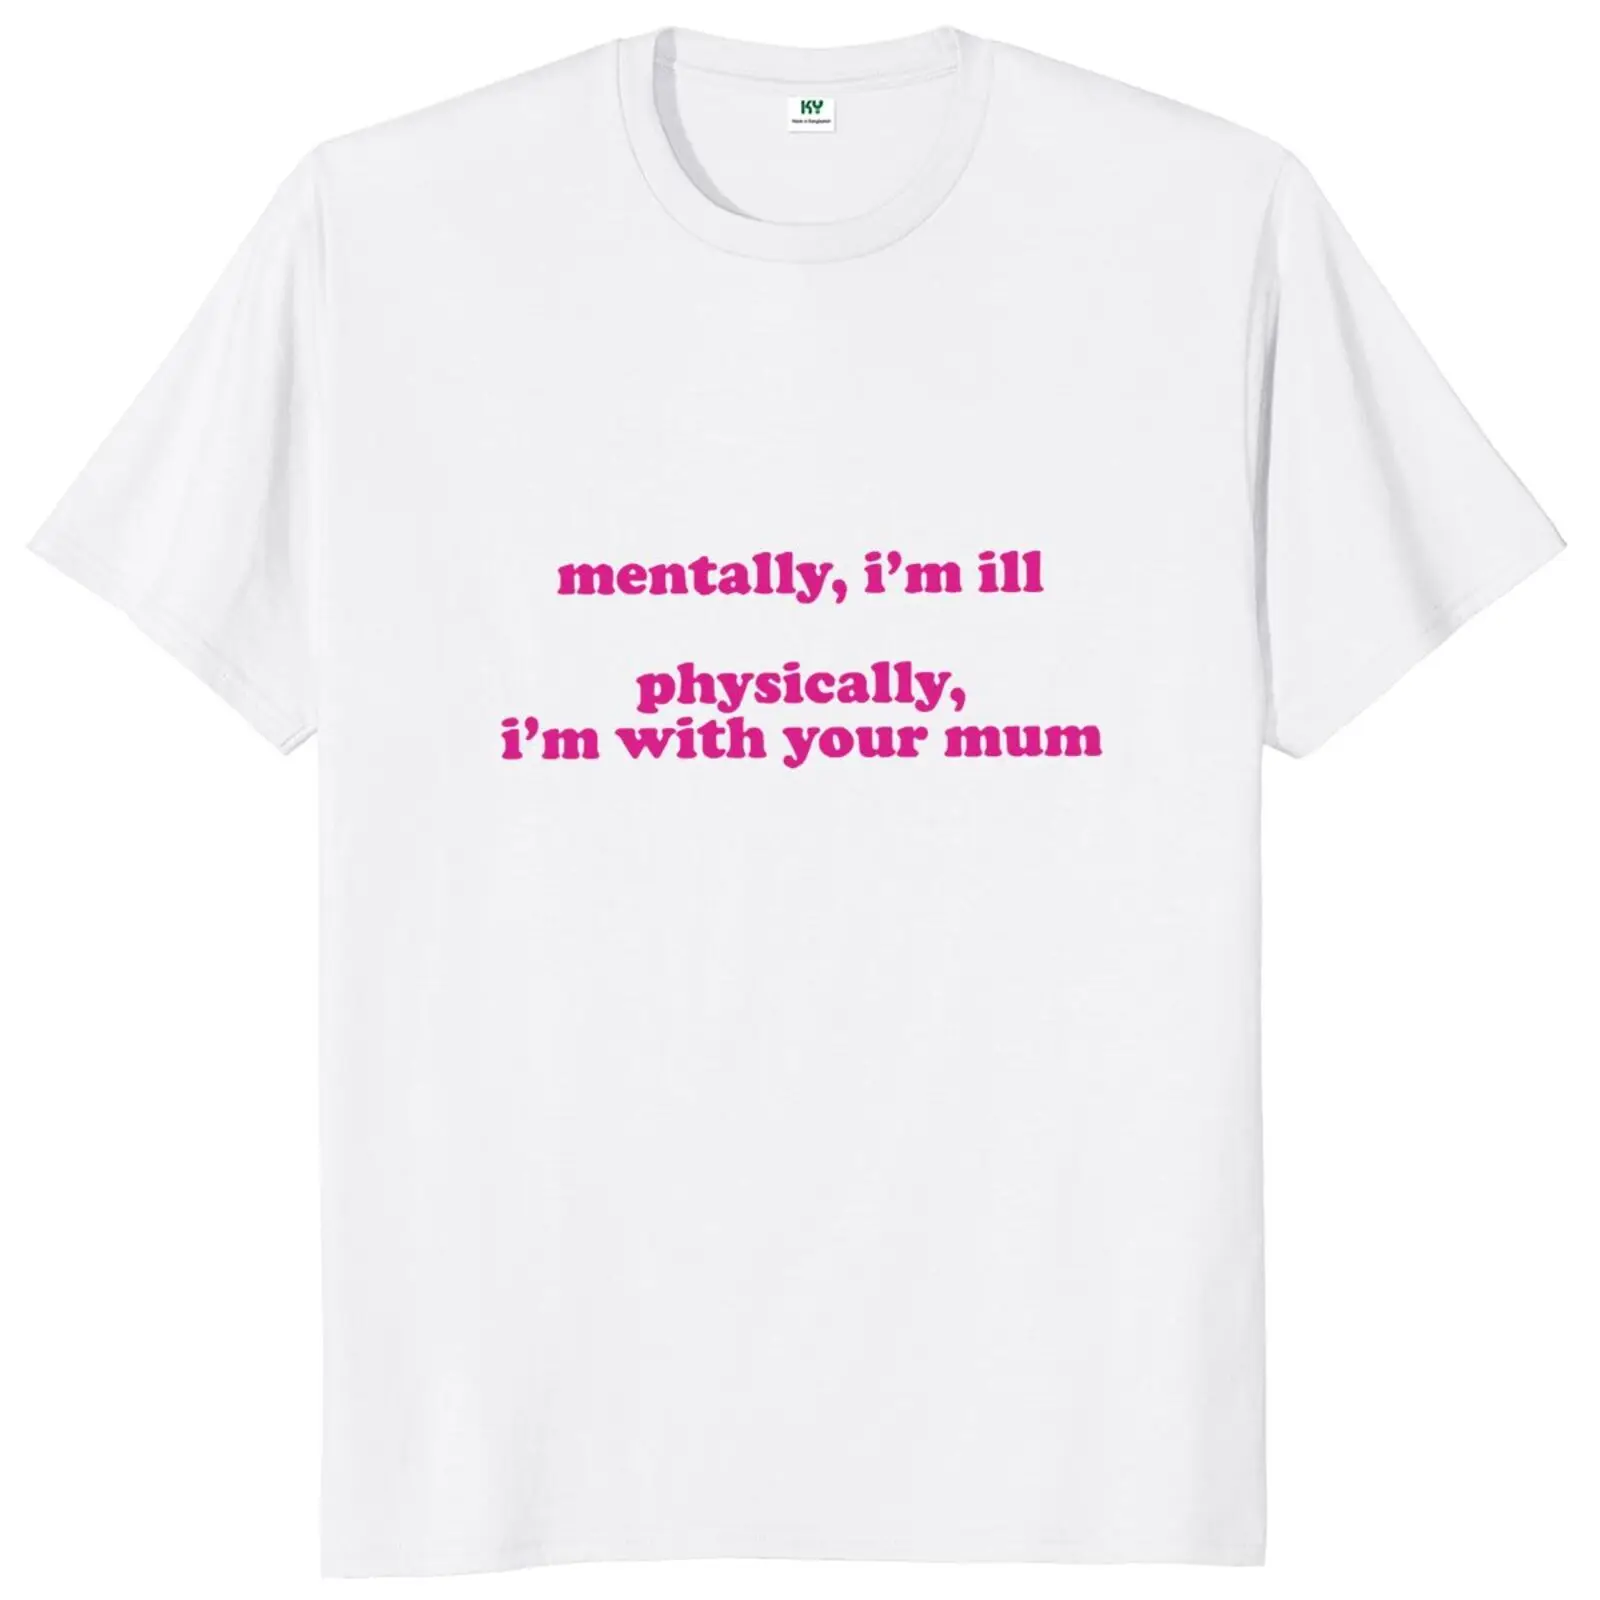 

Mentally I'll Physically With Your Mum T Shirt Funny Slogan Humor Jokes Sarcastic Tee Tops Casual Cotton Unisex Soft T-shirts